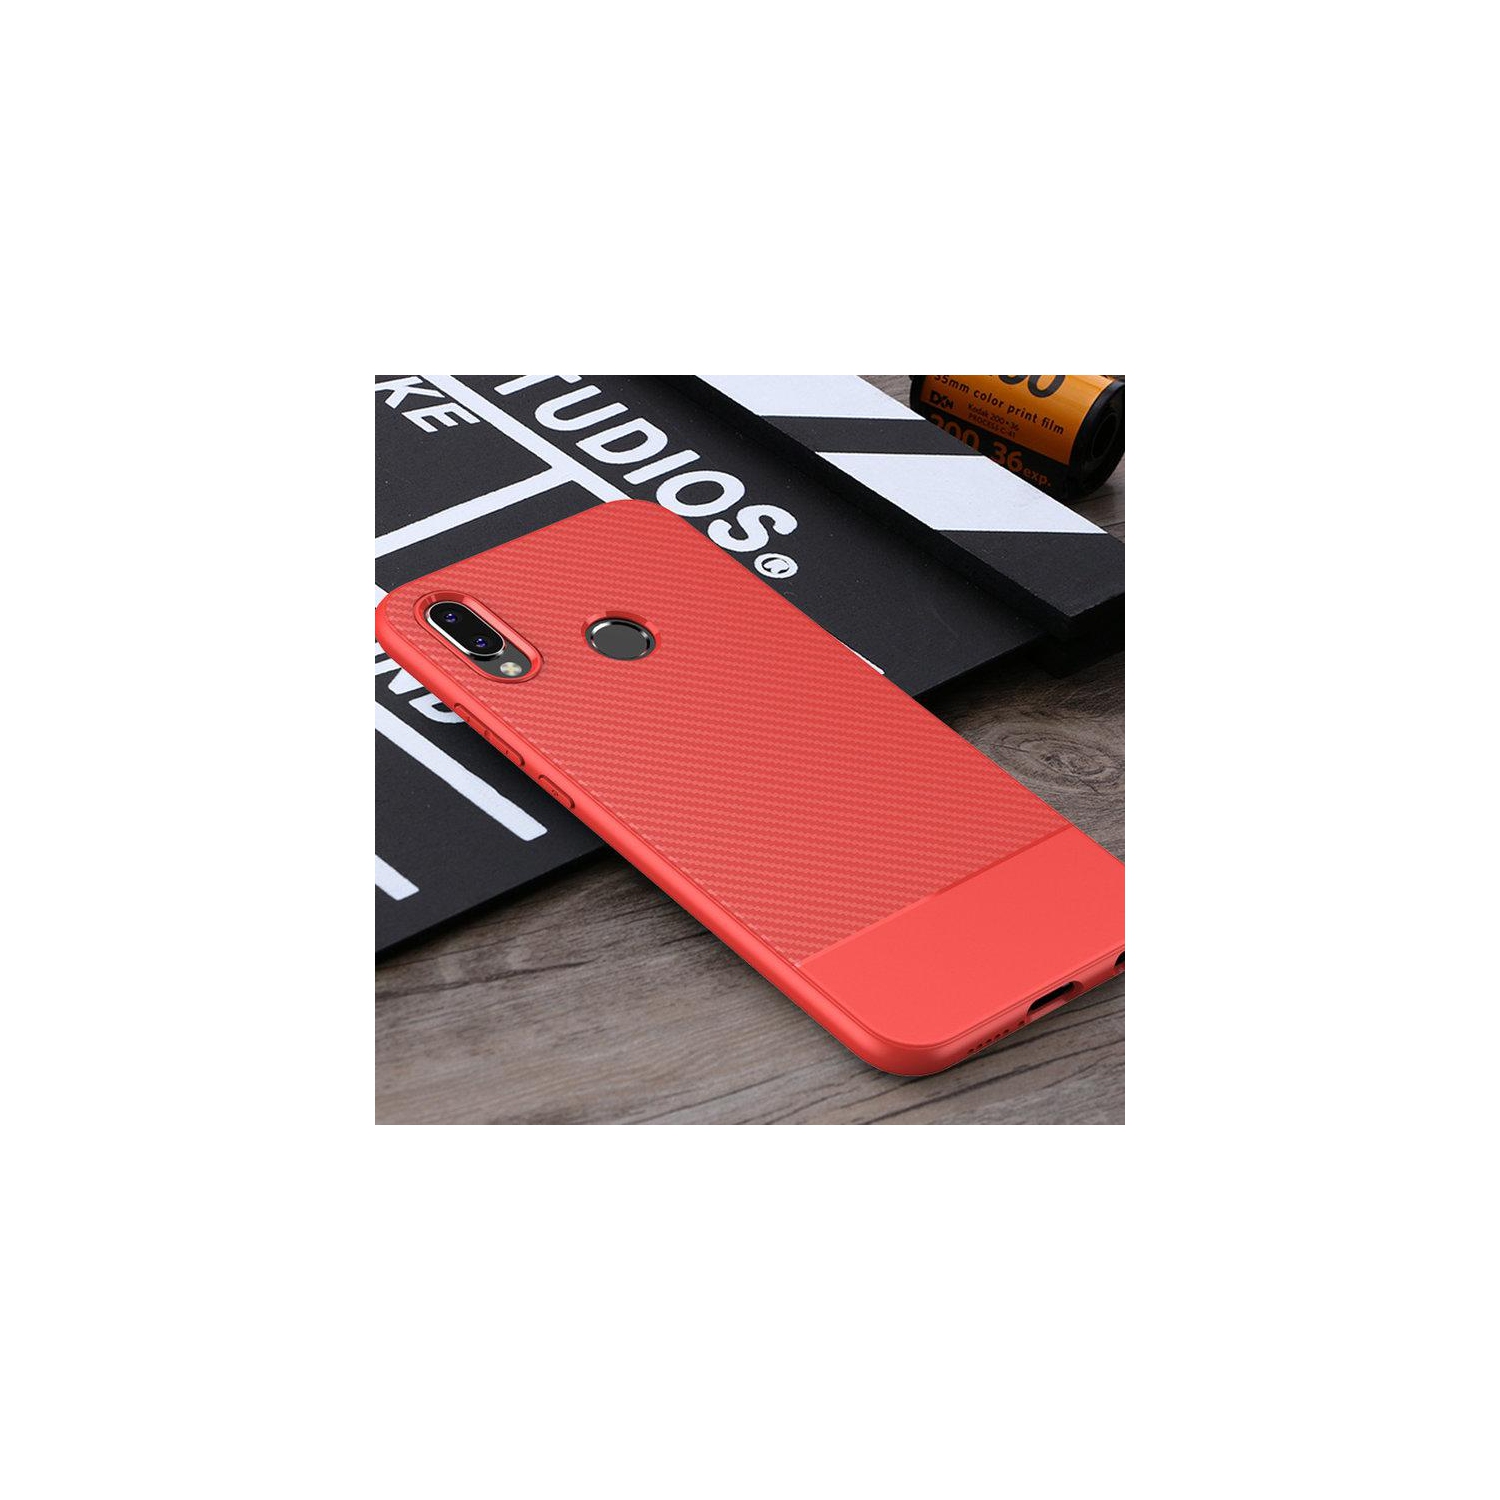 PANDACO Red Carbon Fiber Case for Huawei P20 Lite